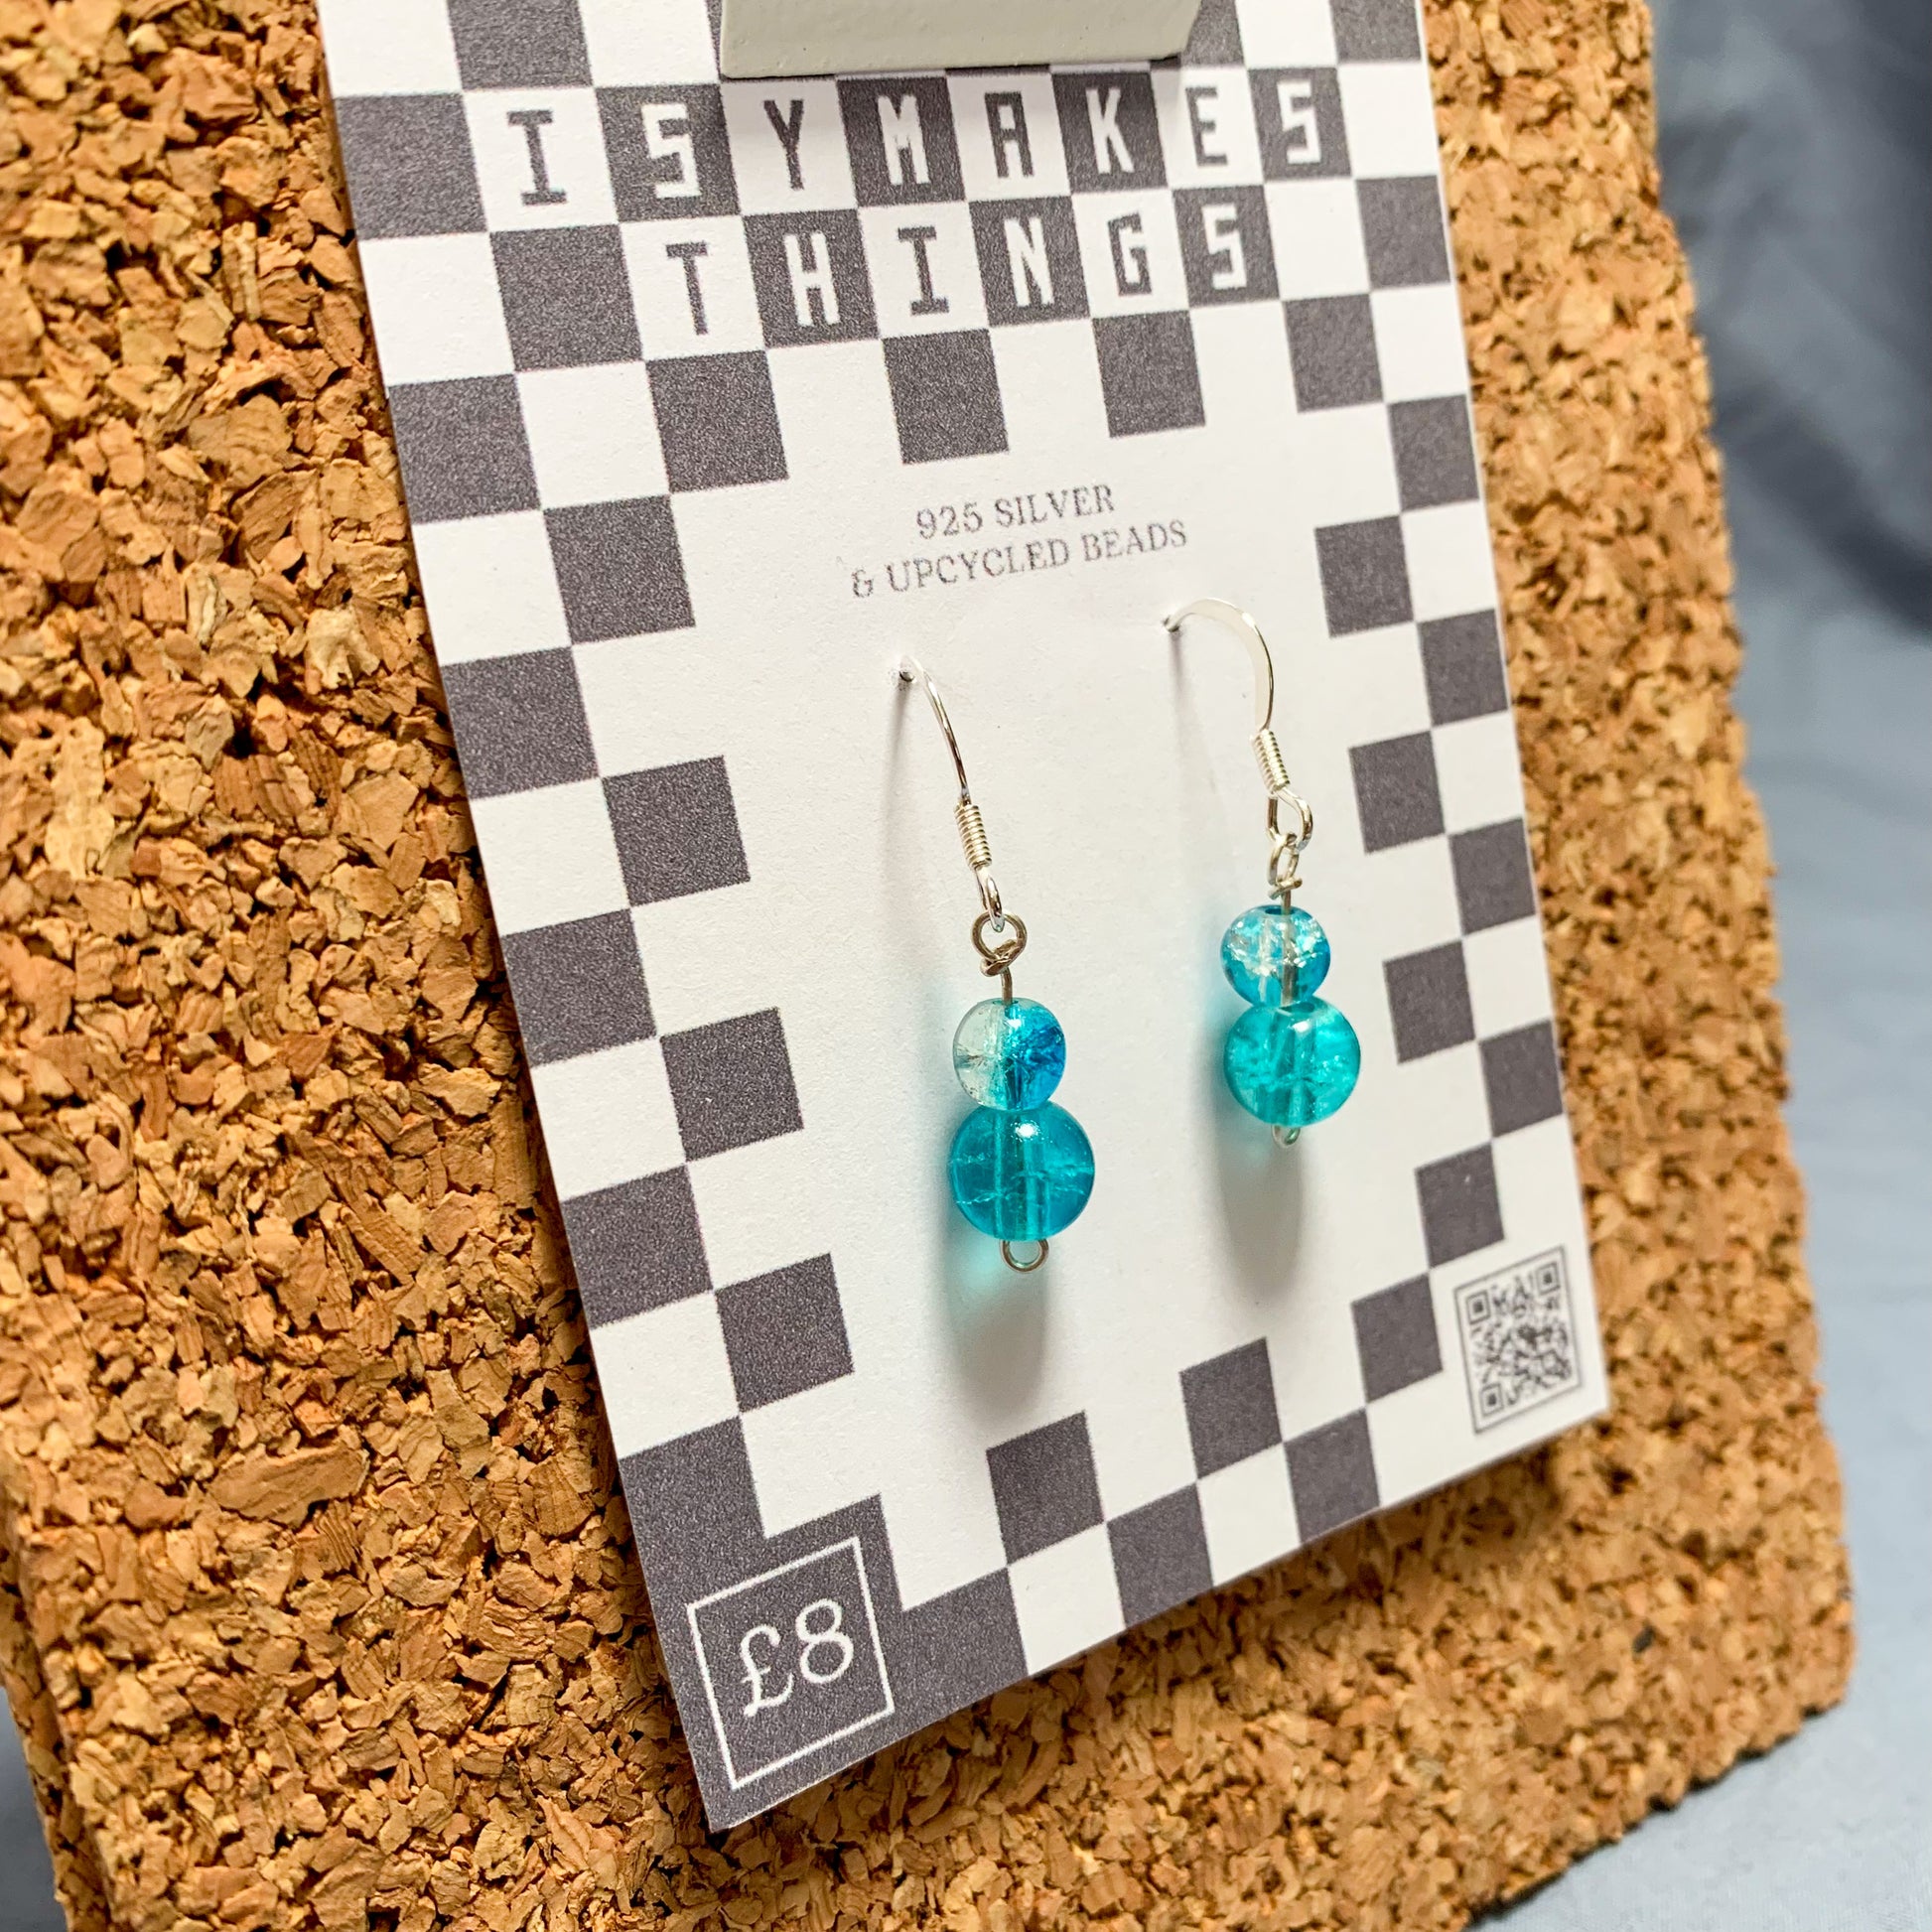 blue bead earrings on a checkerboard backing pegged to a corkboard against a blue background